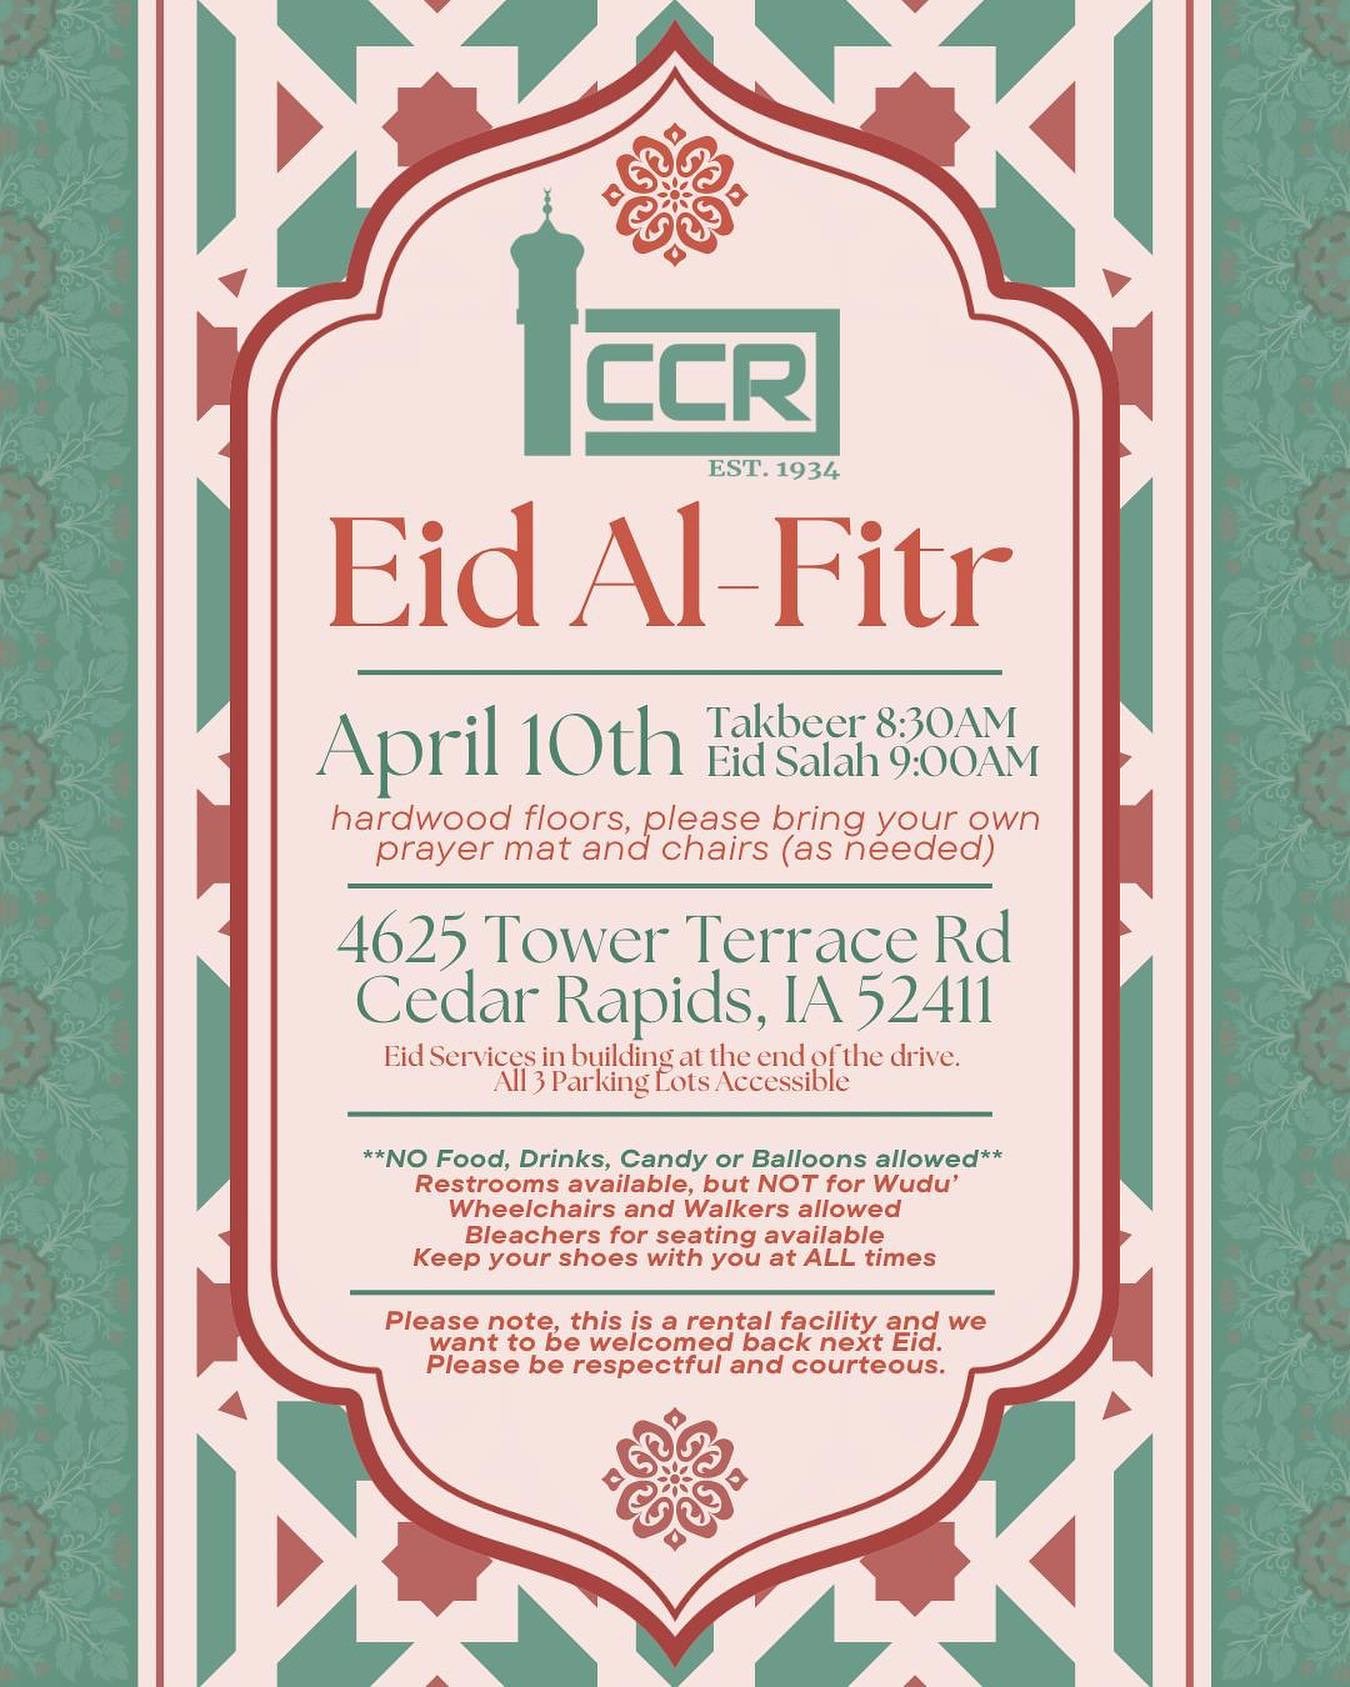 Eid ul-Fitr is almost here ☪️ 🎉 Please be sure to note the NEW address/location. 

Eid Takbeer will begin @8:30 AM
Eid Prayer will begin @9:00AM

Please bring your own prayer rug/mat as we will be sitting on hard floor!!!